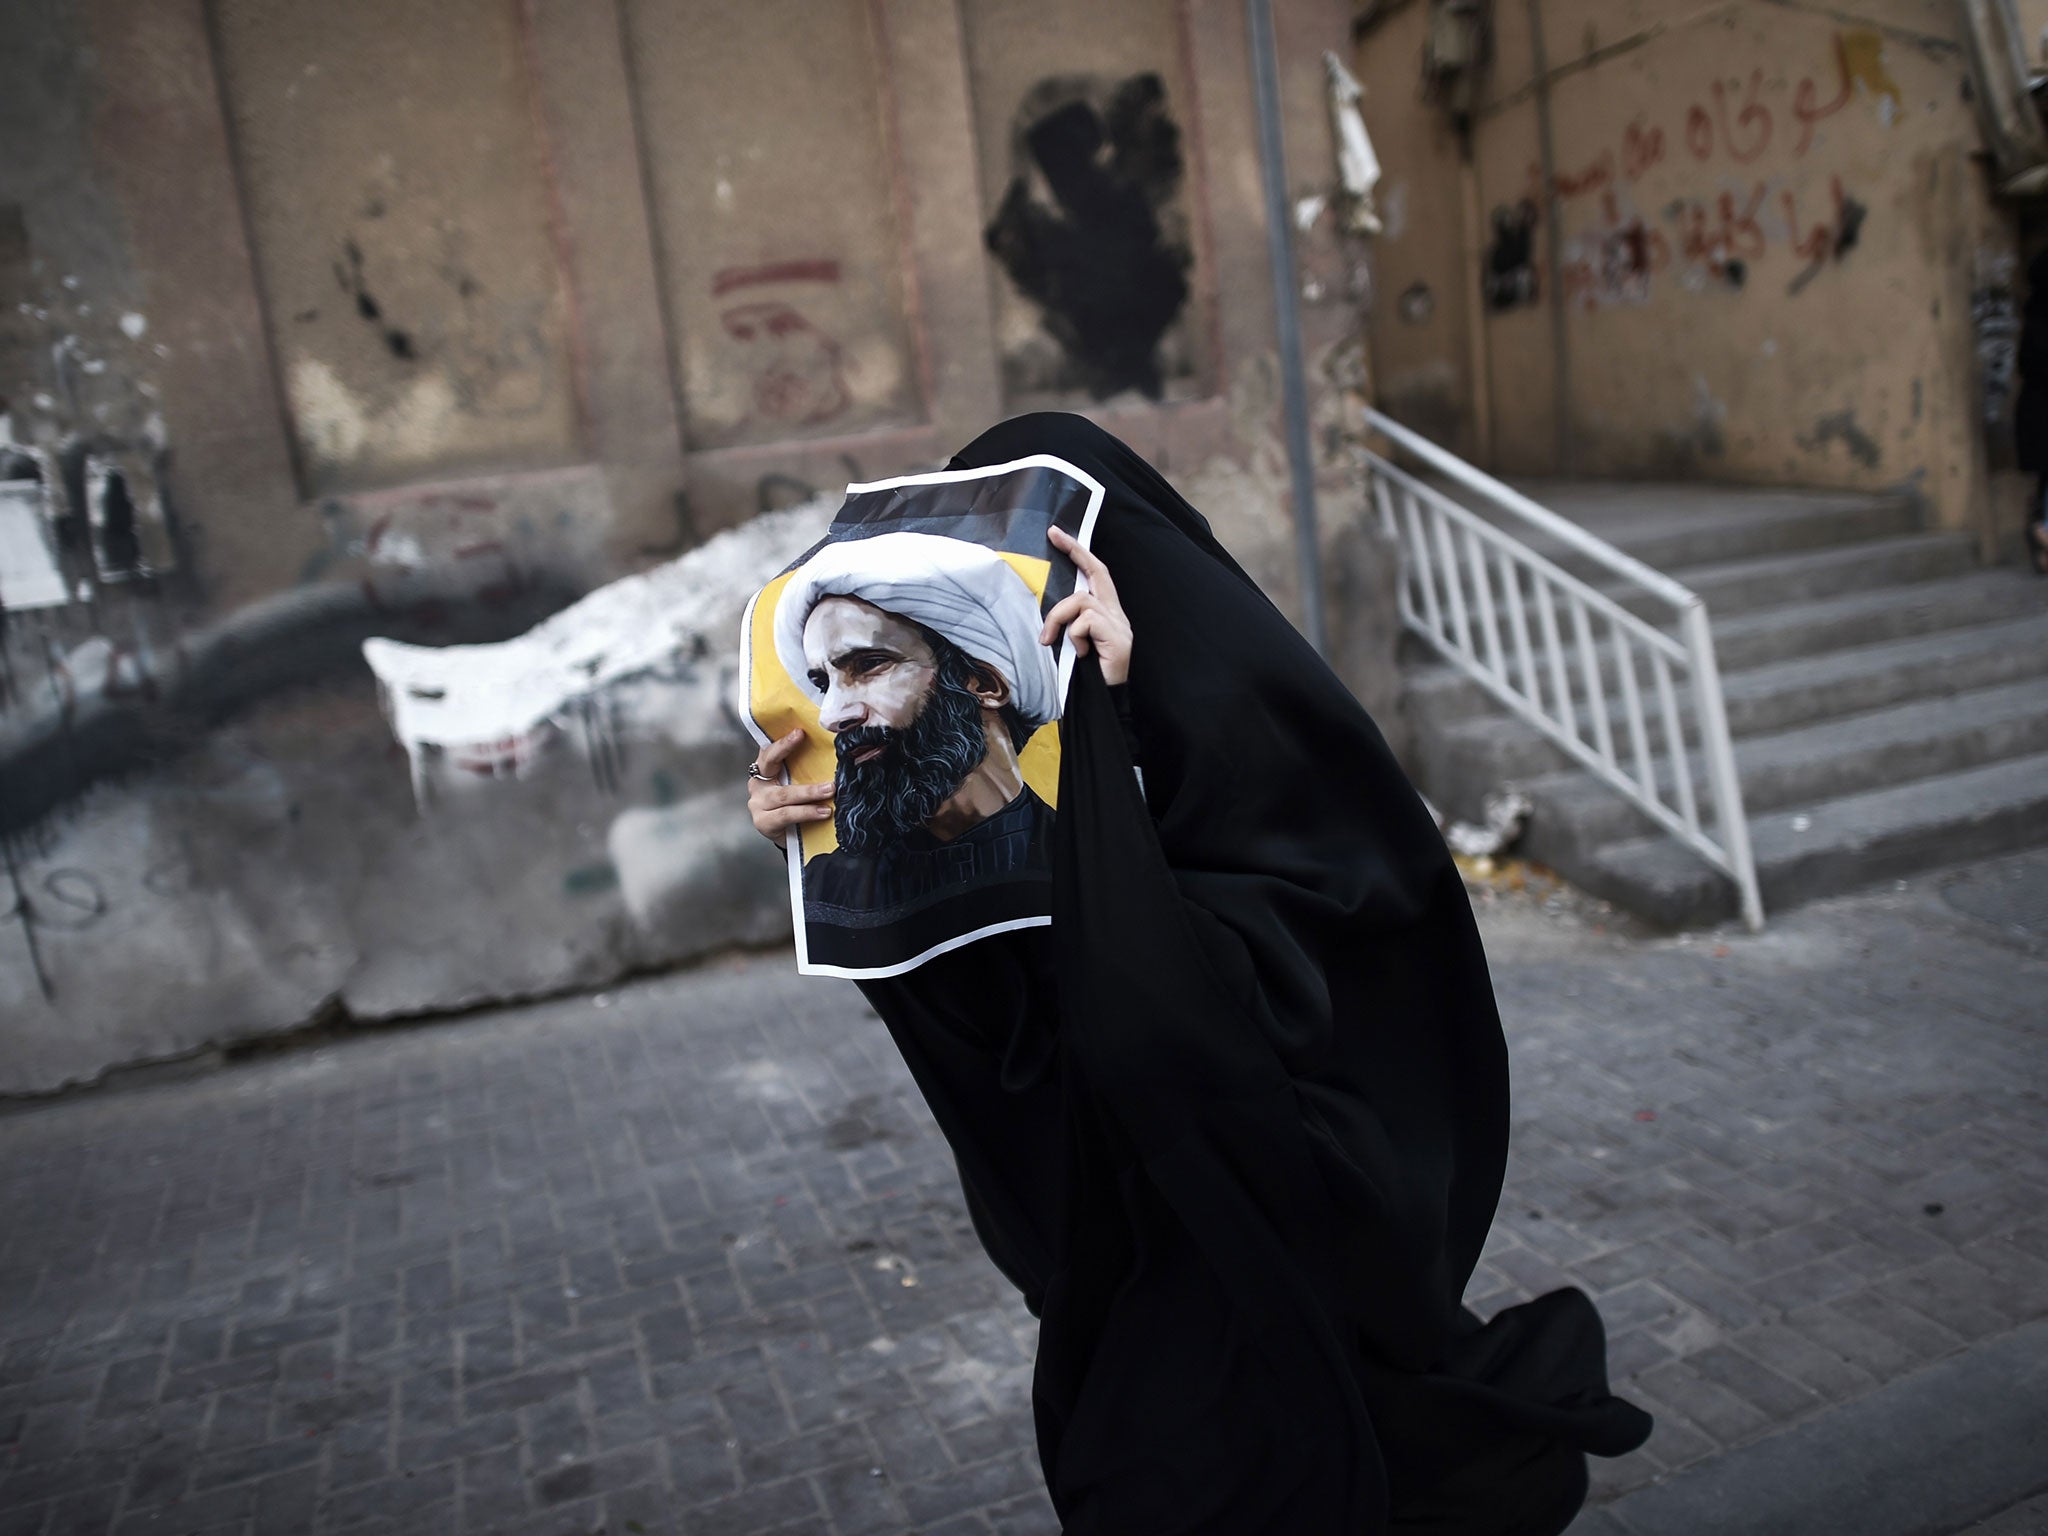 A Bahraini woman bearing a portrait of the executed Shia cleric Nimr al-Nimr during a protest in the capital Manama